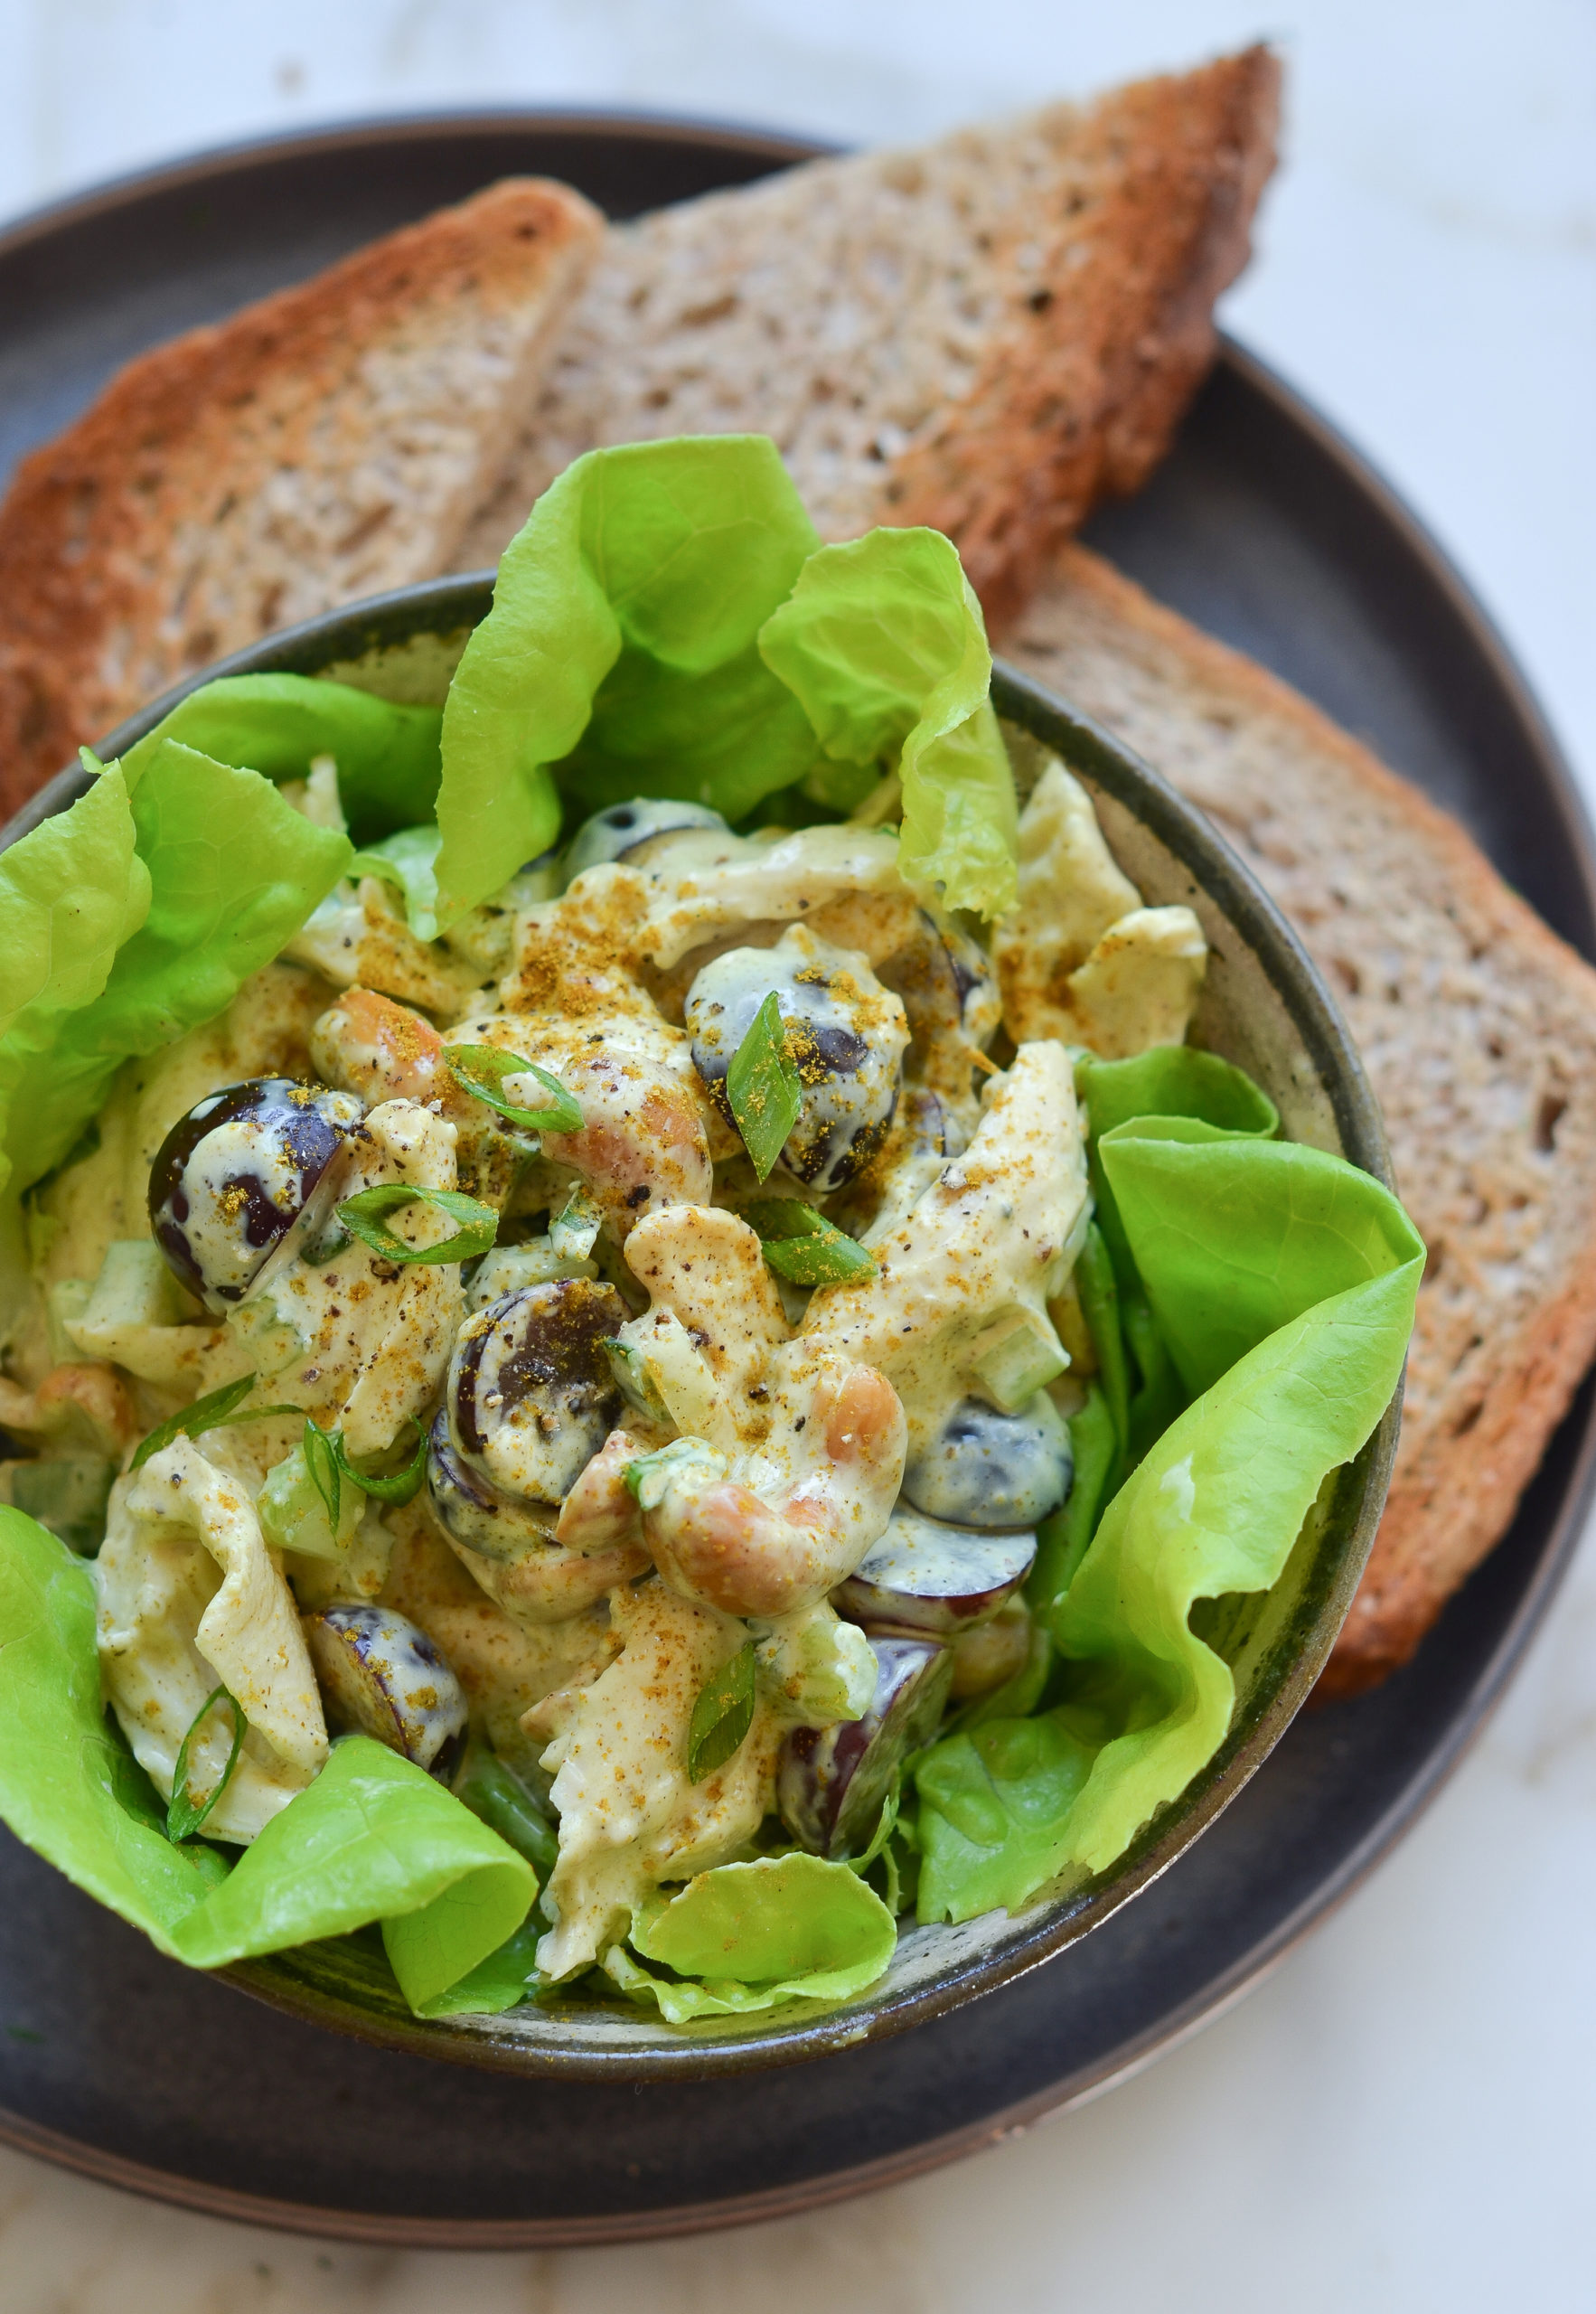 https://www.onceuponachef.com/images/2011/10/Curried-Chicken-Salad-6-scaled.jpg